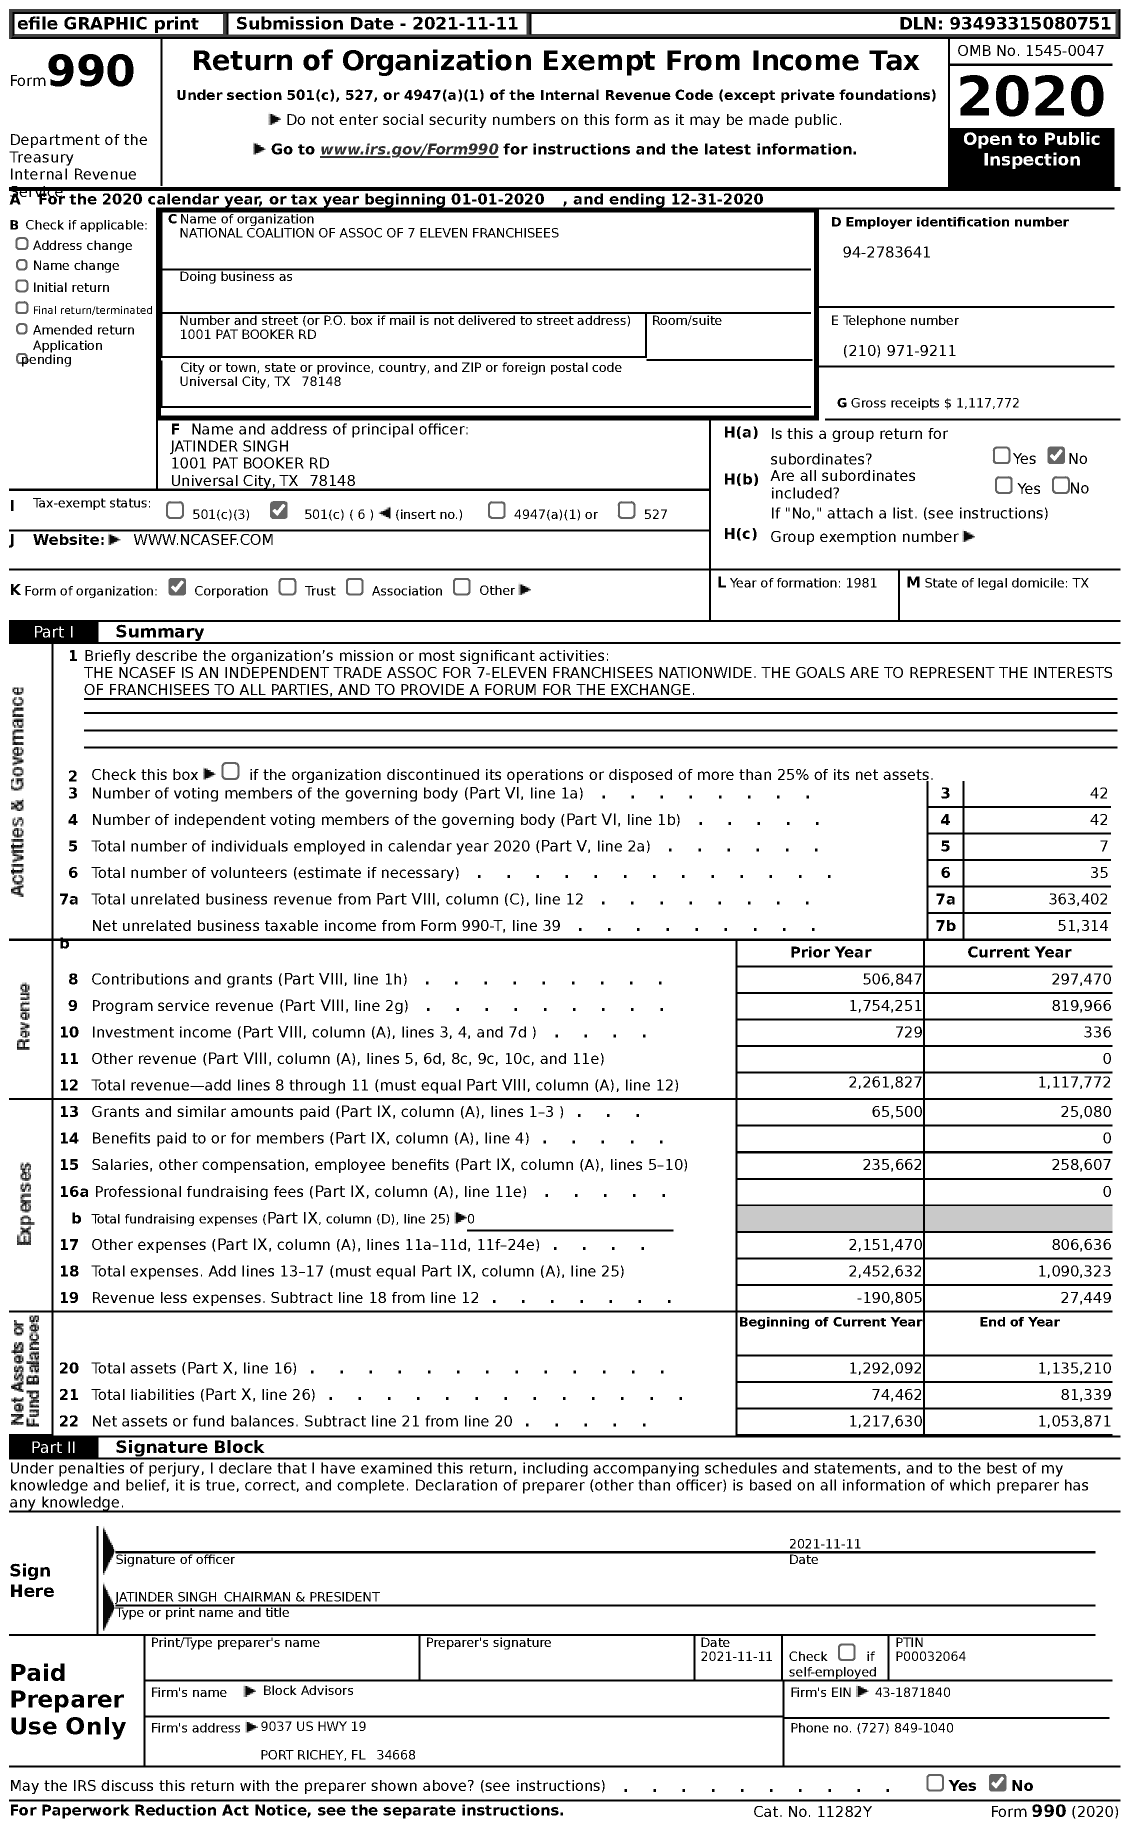 Image of first page of 2020 Form 990 for National Coalition of Associations of 7 Eleven Franchisees (NCASEF)